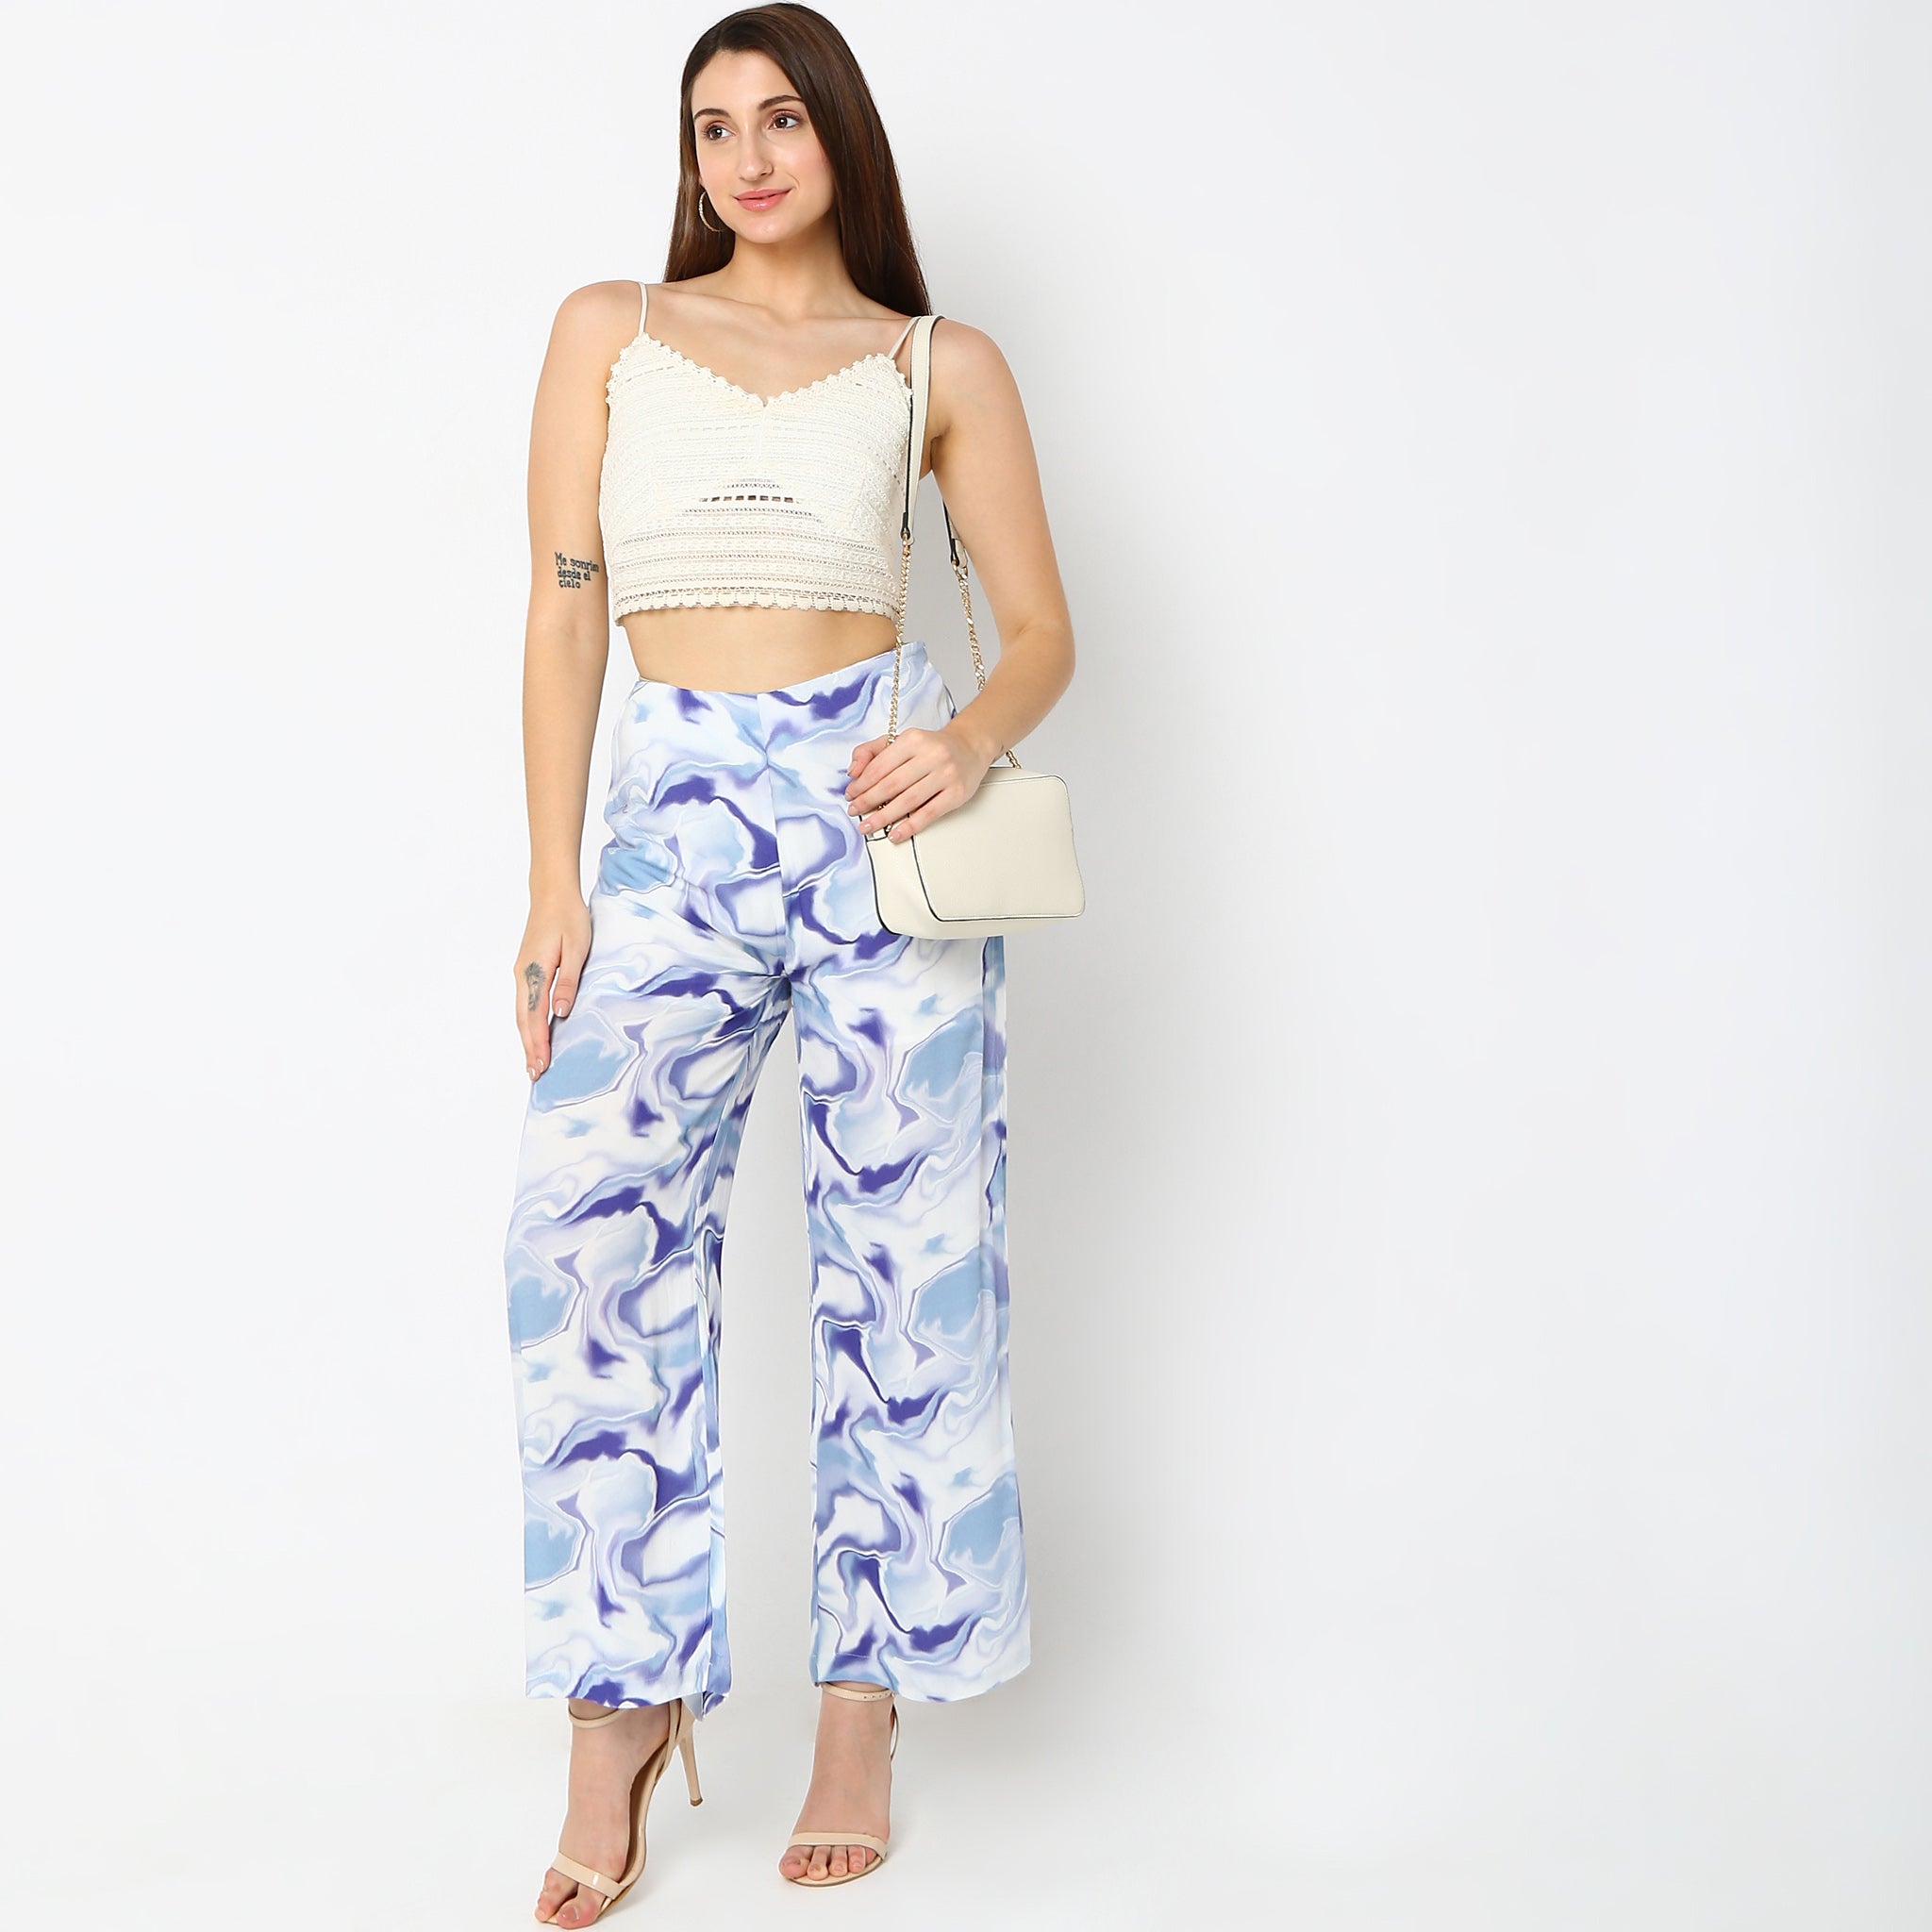 Flare Fit Abstract Mid Rise Palazzos